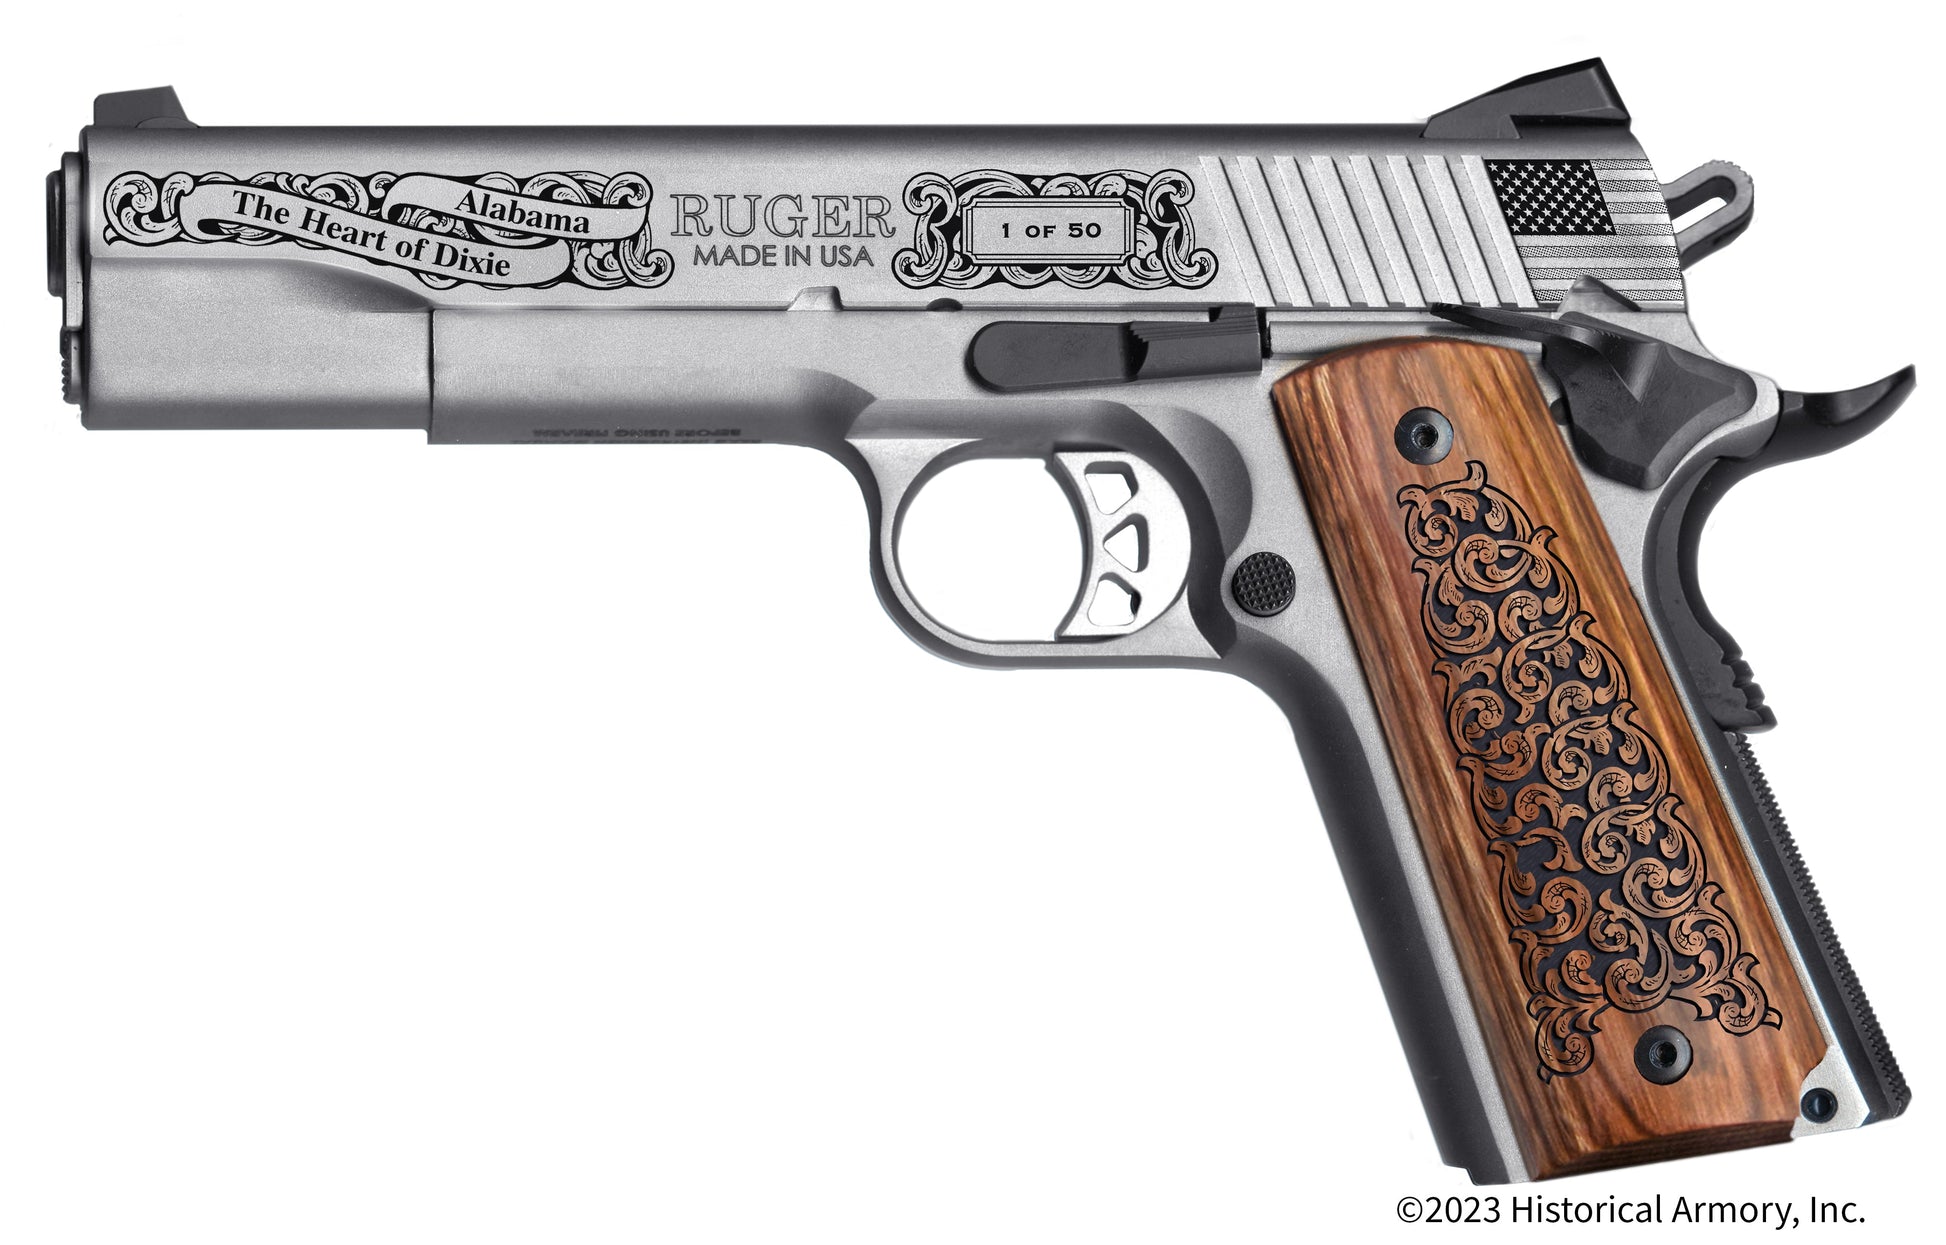 Clarke  County Alabama Engraved .45 Auto Ruger 1911